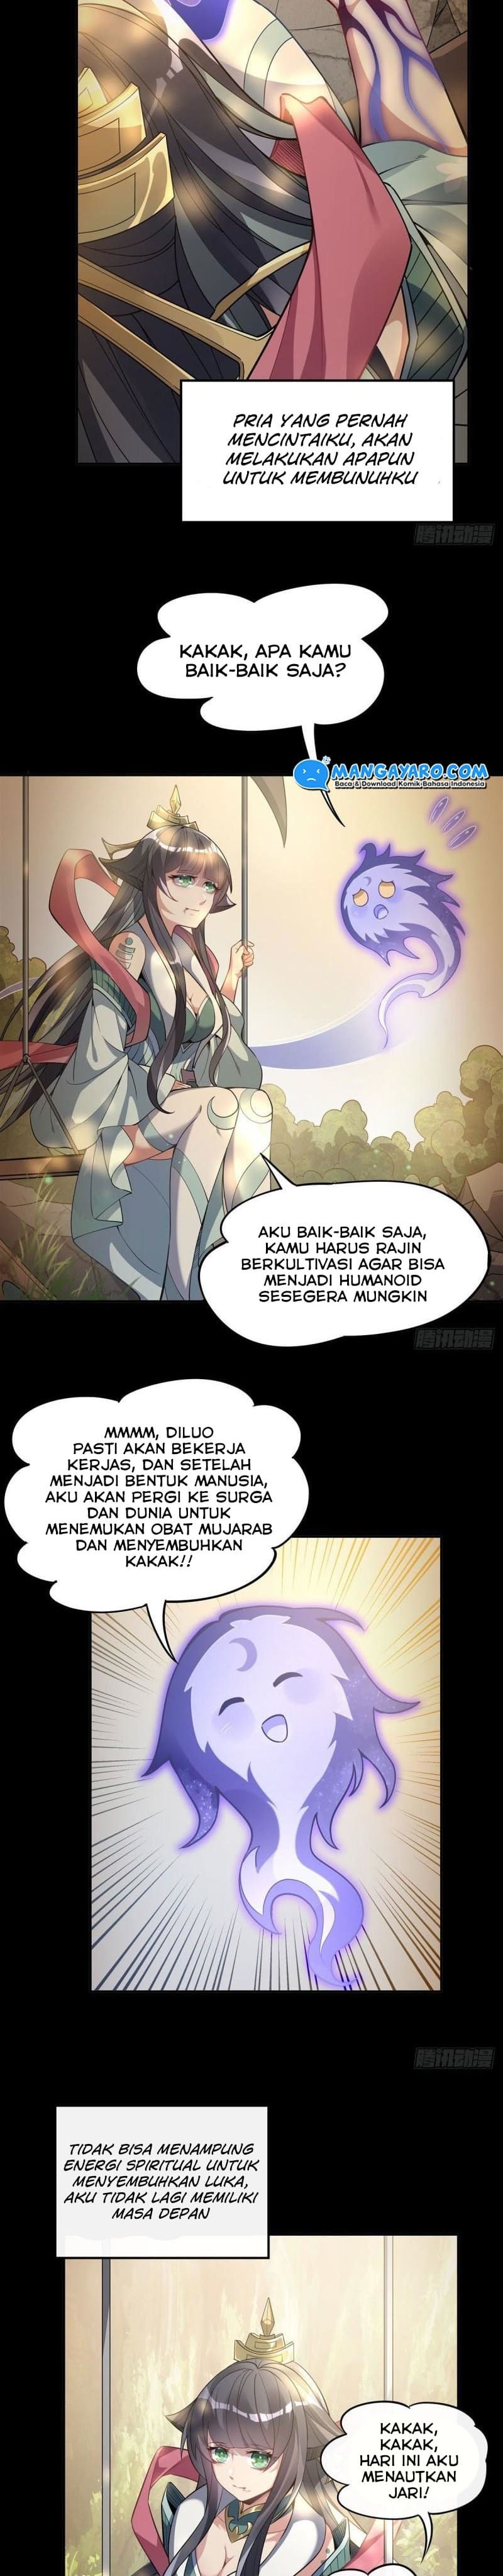 Dilarang COPAS - situs resmi www.mangacanblog.com - Komik my female apprentices are all big shots from the future 059 - chapter 59 60 Indonesia my female apprentices are all big shots from the future 059 - chapter 59 Terbaru 8|Baca Manga Komik Indonesia|Mangacan